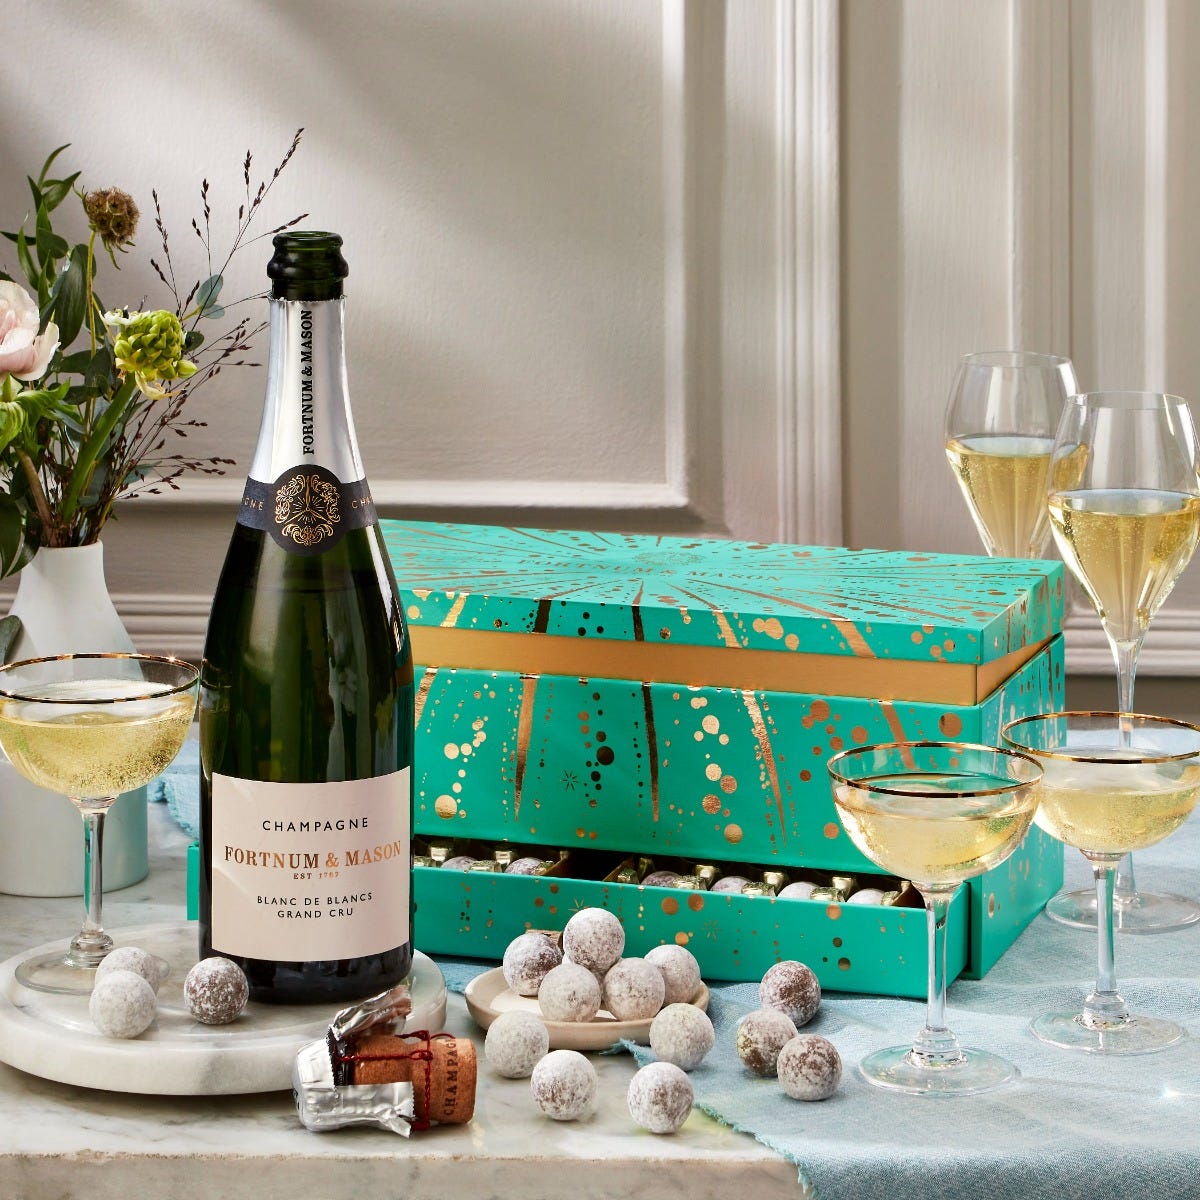 Share 156+ champagne and chocolate gift set best